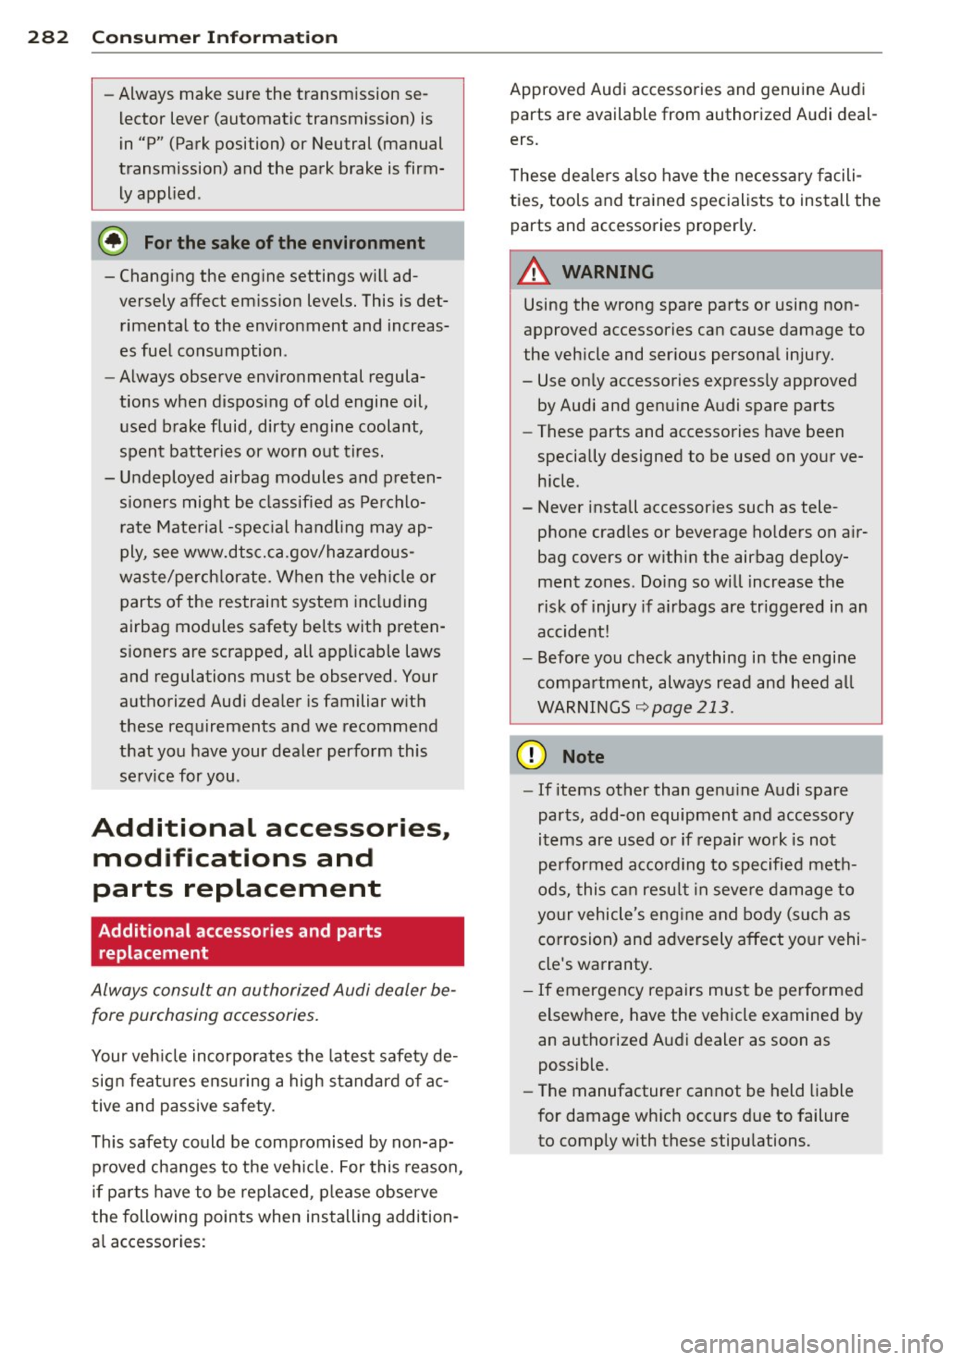 AUDI A4 2013  Owners Manual 28 2  Con sum er  Inf ormation 
-Always  make sure the  transmission  se­
lector  lever  (automatic  transmiss ion)  is 
in  "P"  (Park position)  or  Neutral  (manual 
transmission)  and the  park  